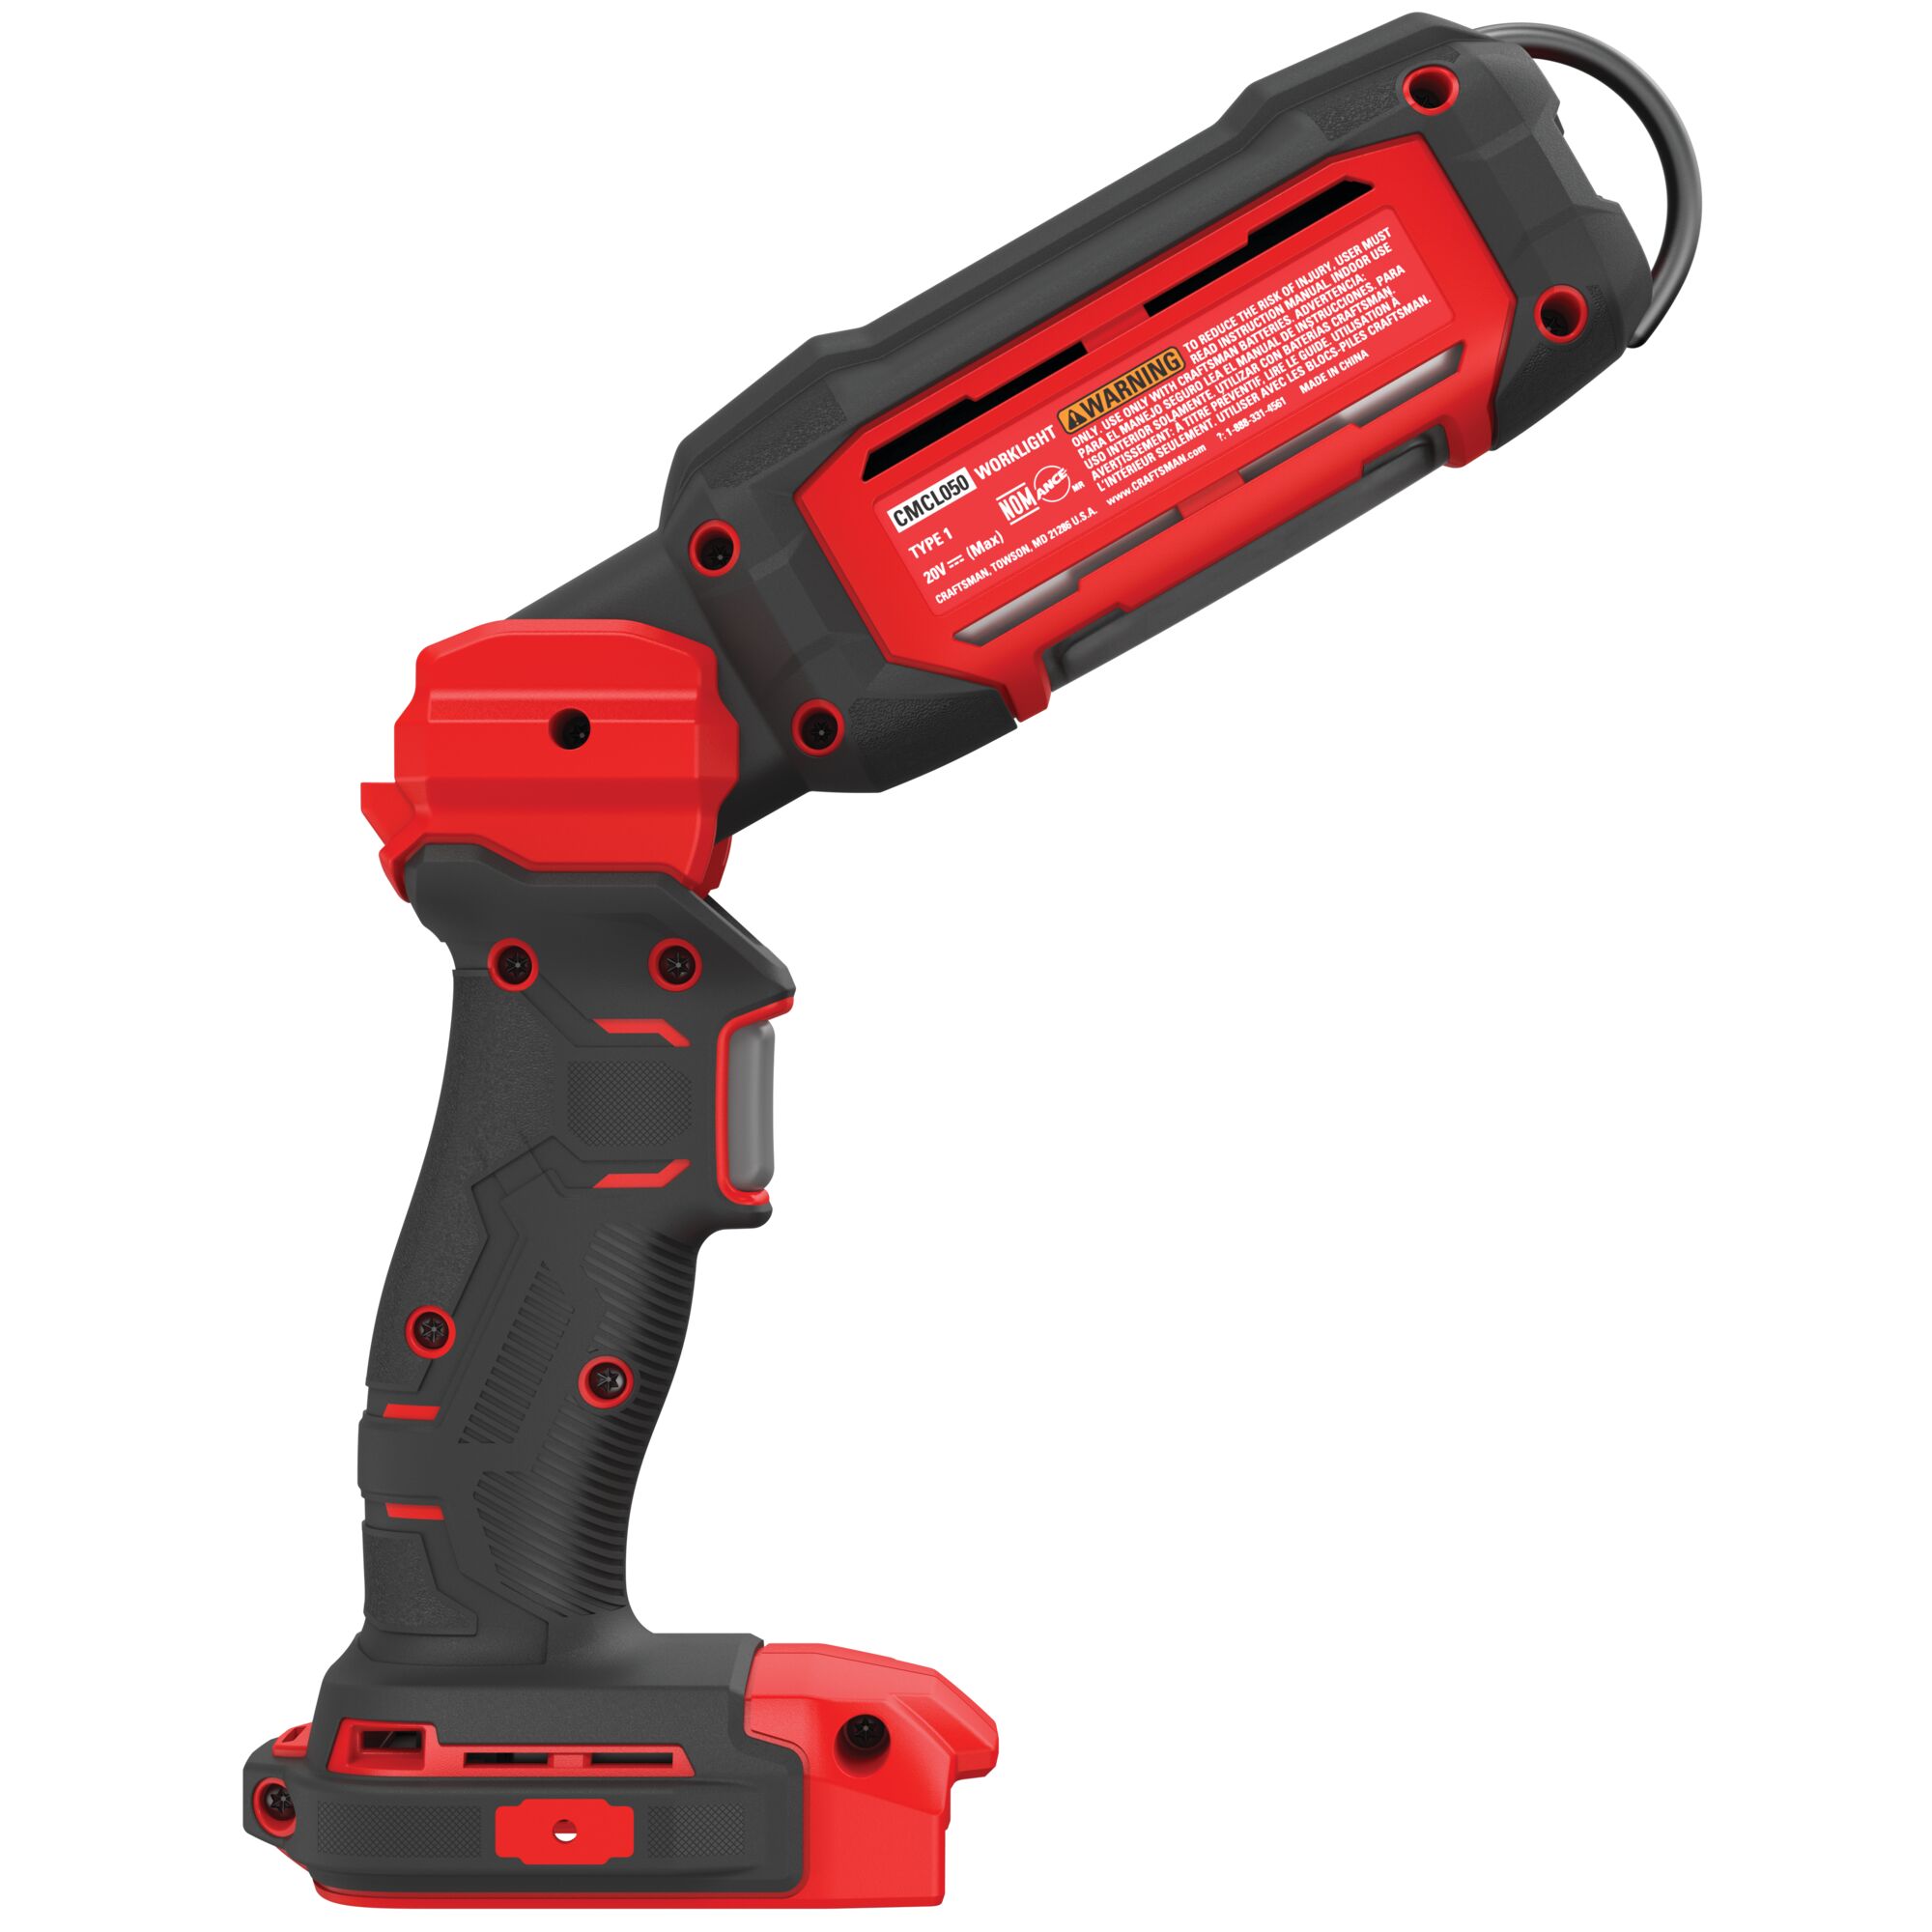 Left side view of cordless led hanging work light tool only.